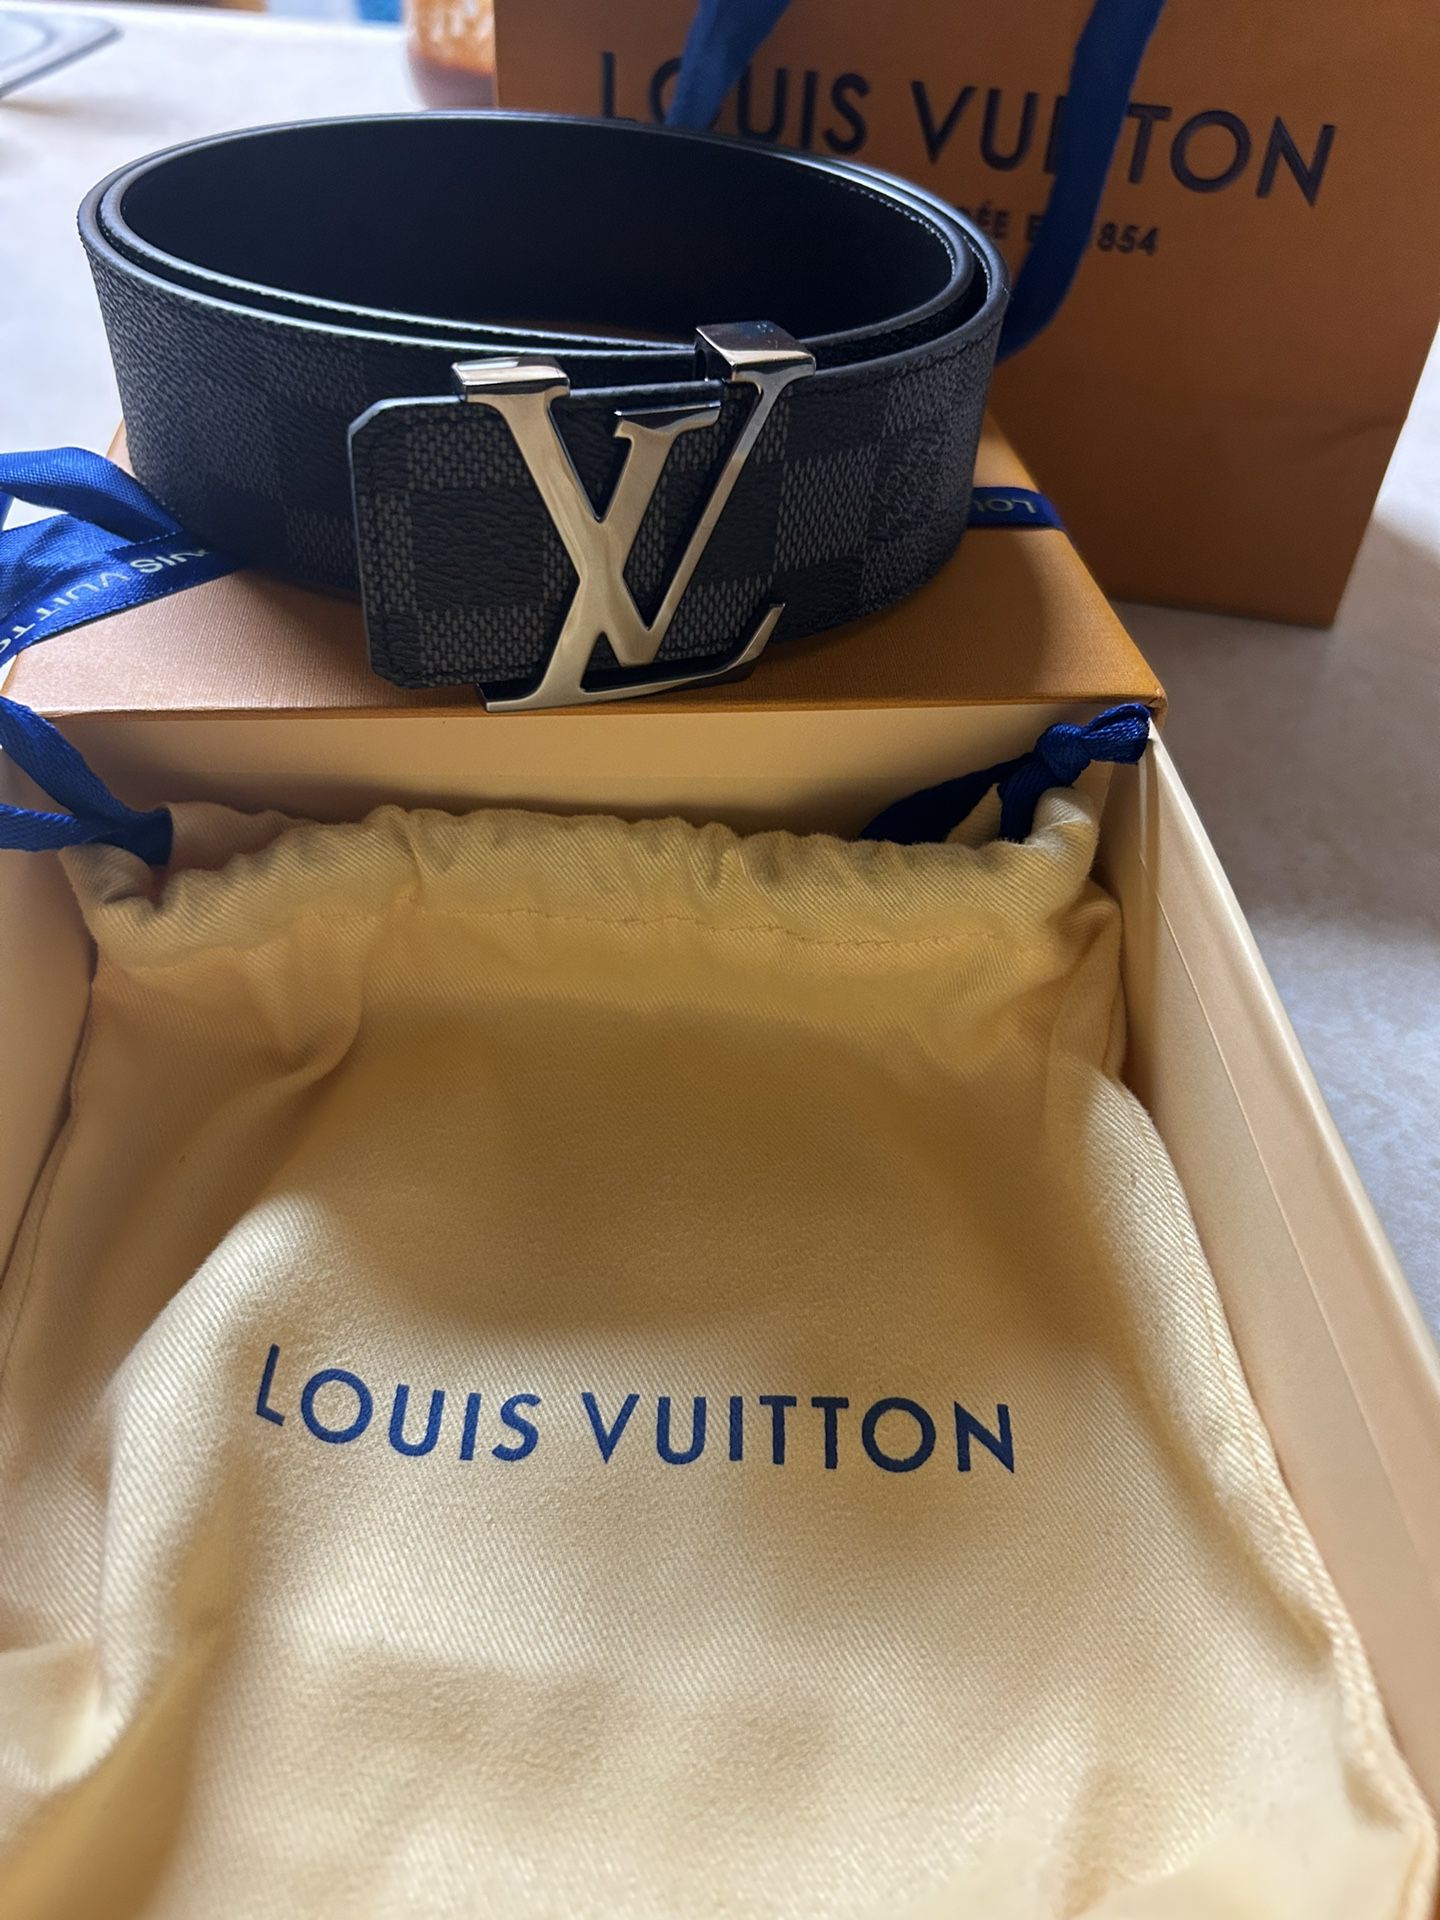 2nd replacement belt for dad's LV buckle tailored with Aquila – Keching